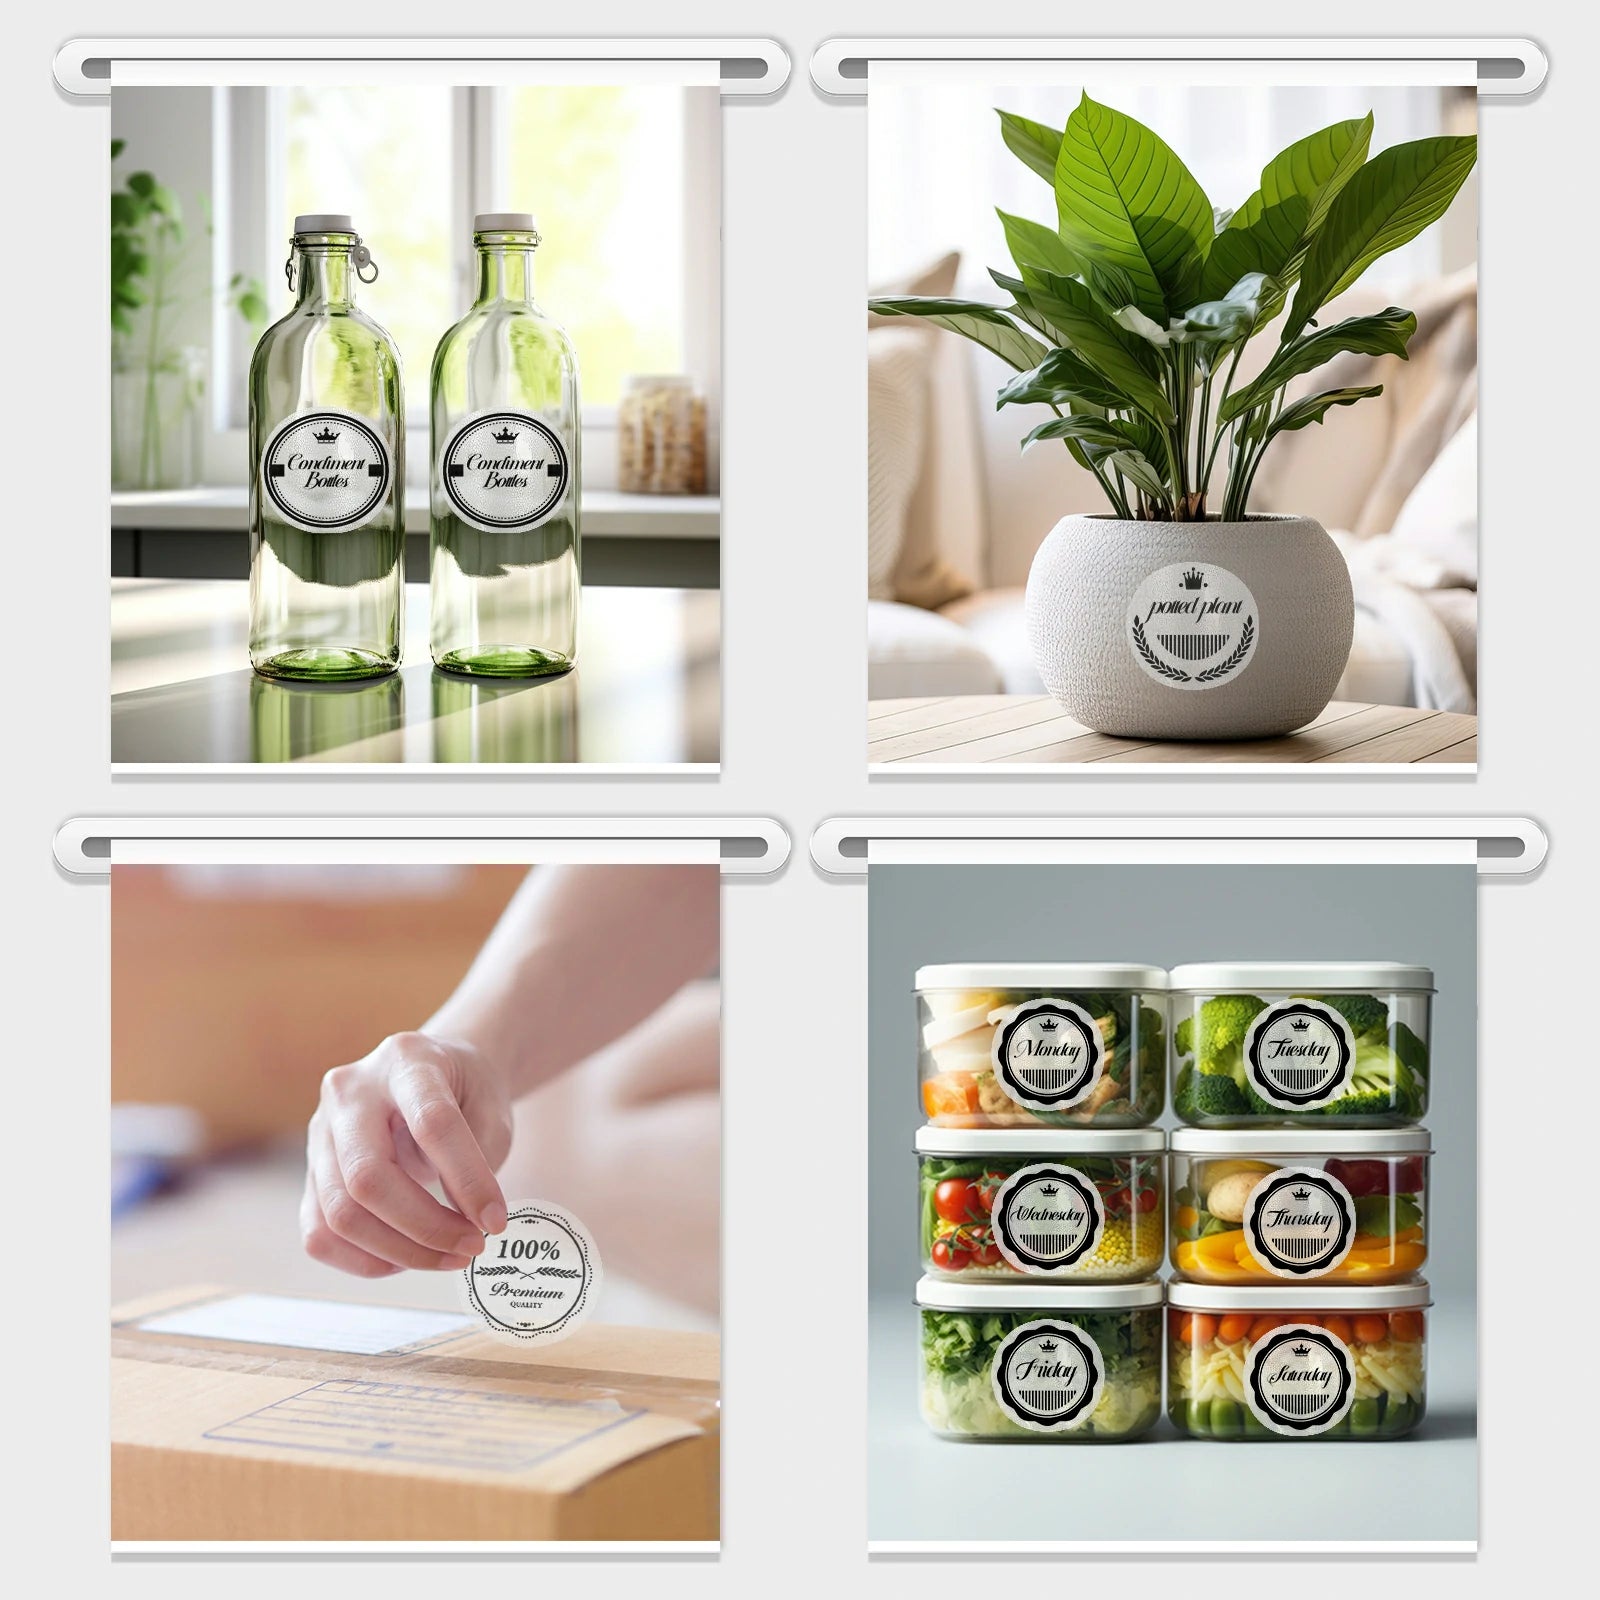 MUNBYN silver glitter labels have a clear design that adds an elegant look to any item.